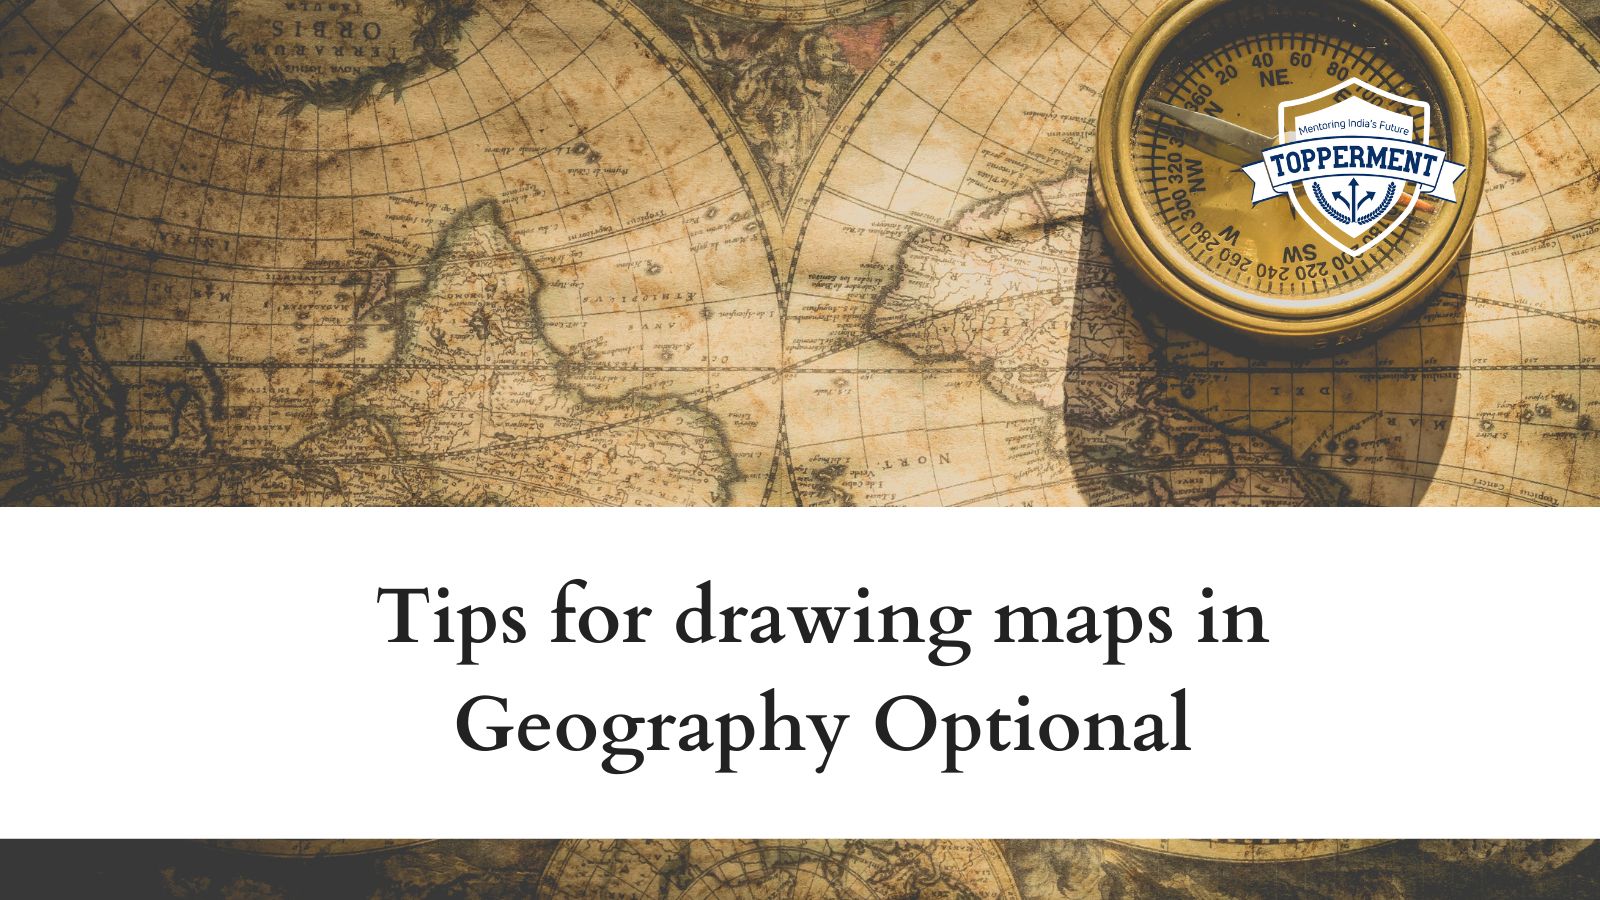 Tips-for-drawing-maps-in-Geography-Optional-Best-UPSC-IAS-Coaching-For-Mentorship-And-Guidance